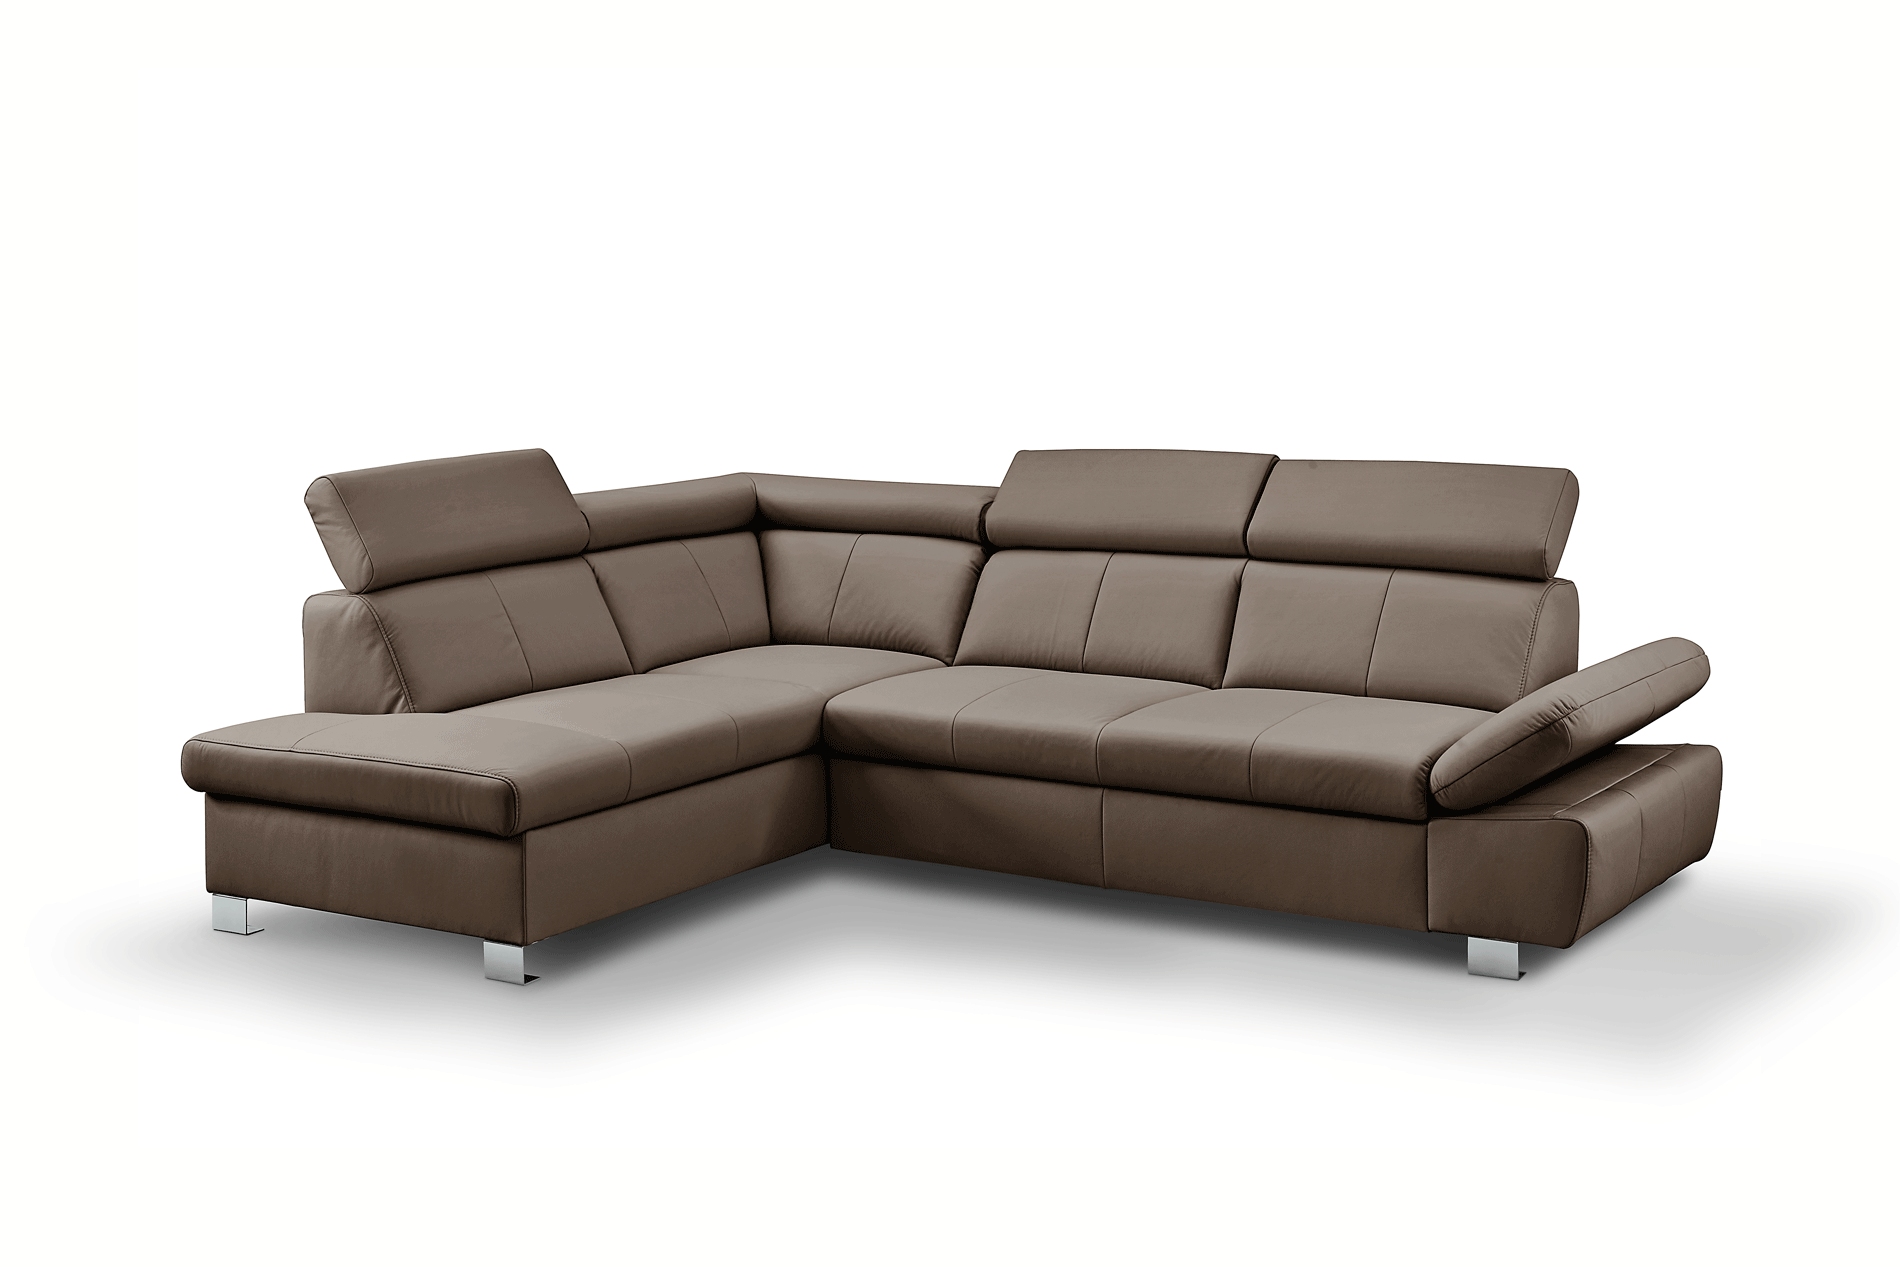 Brands ALF Capri Coffee Tables, Italy Happy Sectional Leather